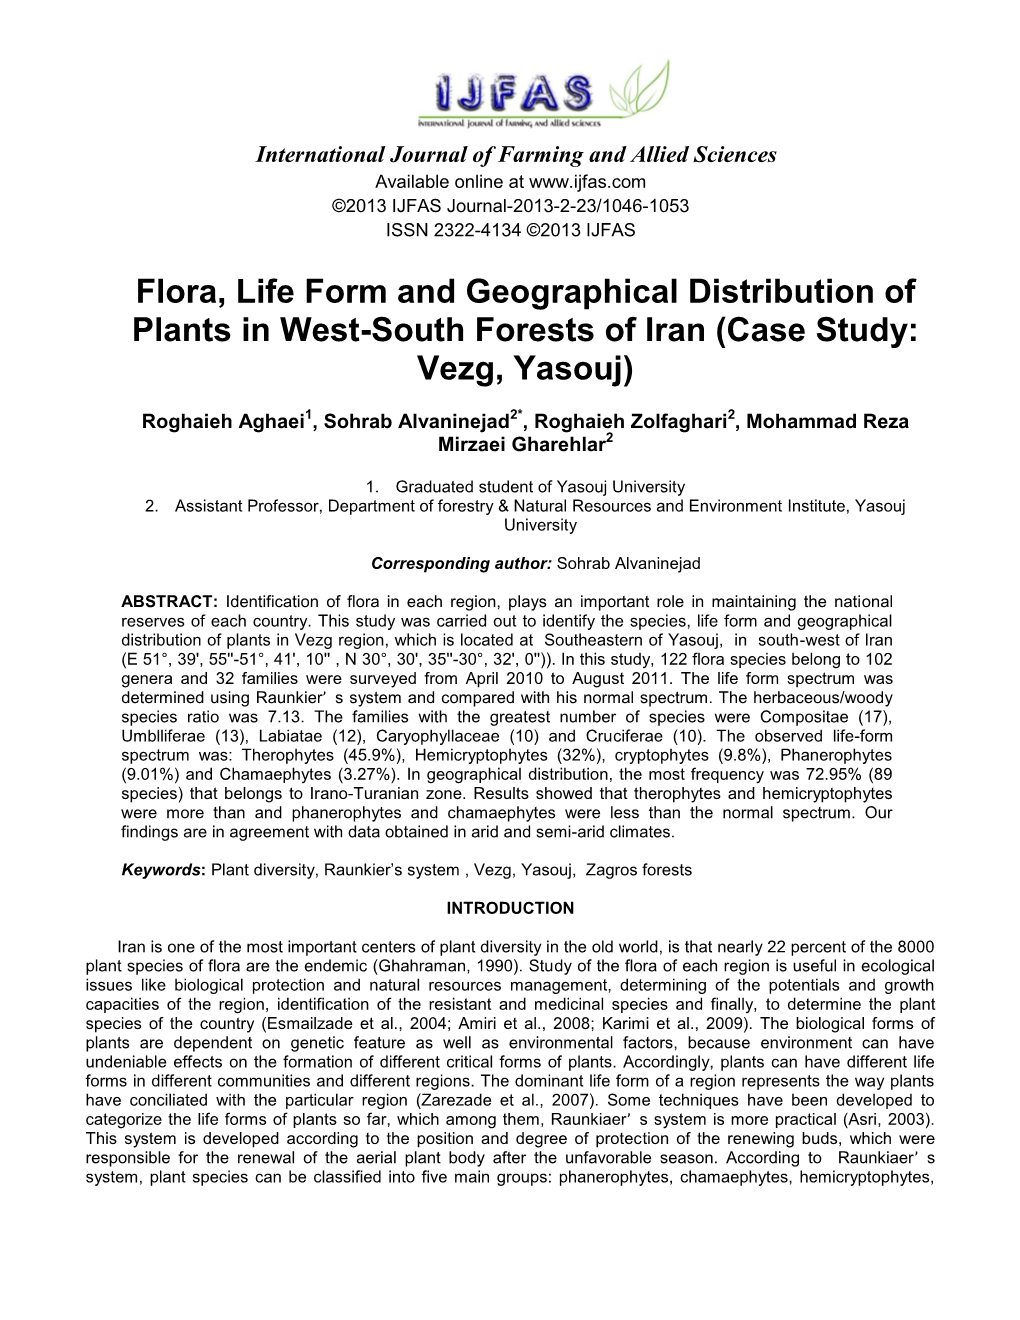 Flora, Life Form and Geographical Distribution of Plants in West-South Forests of Iran (Case Study: Vezg, Yasouj)